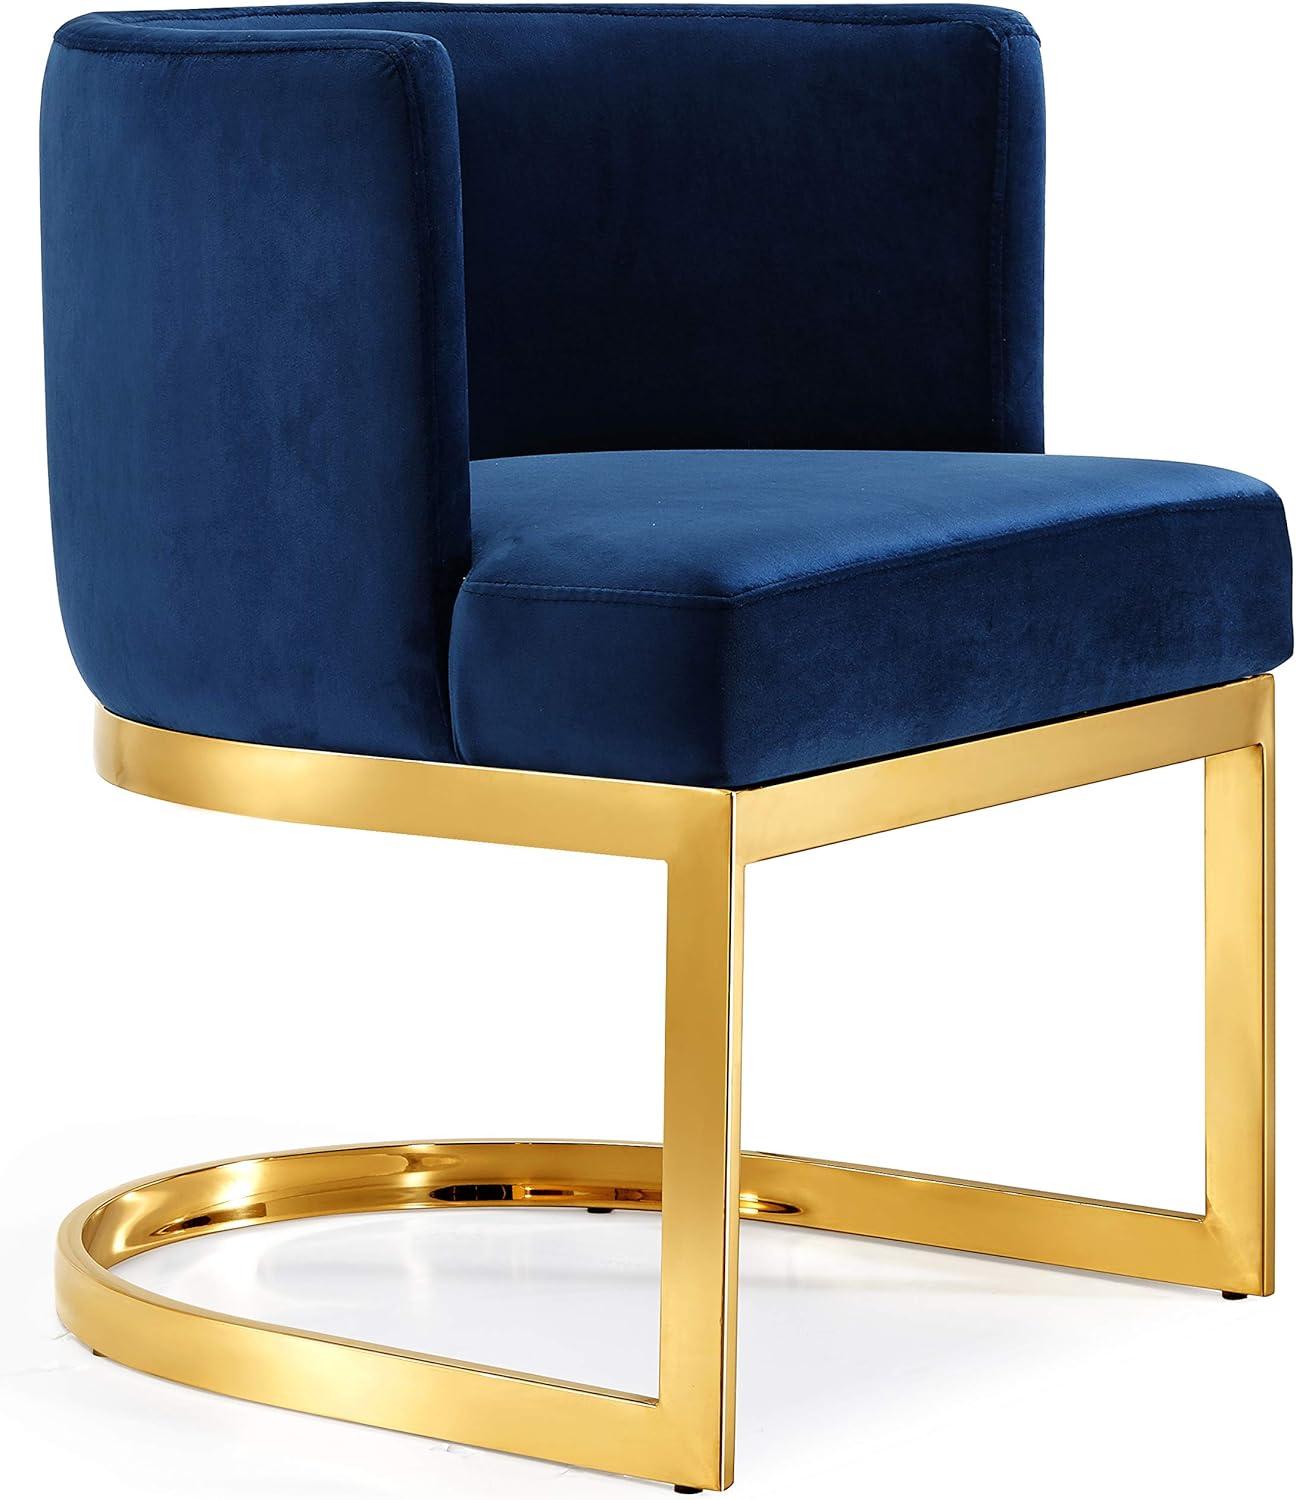 Navy Velvet Upholstered Low Arm Chair with Gold Stainless Steel Base